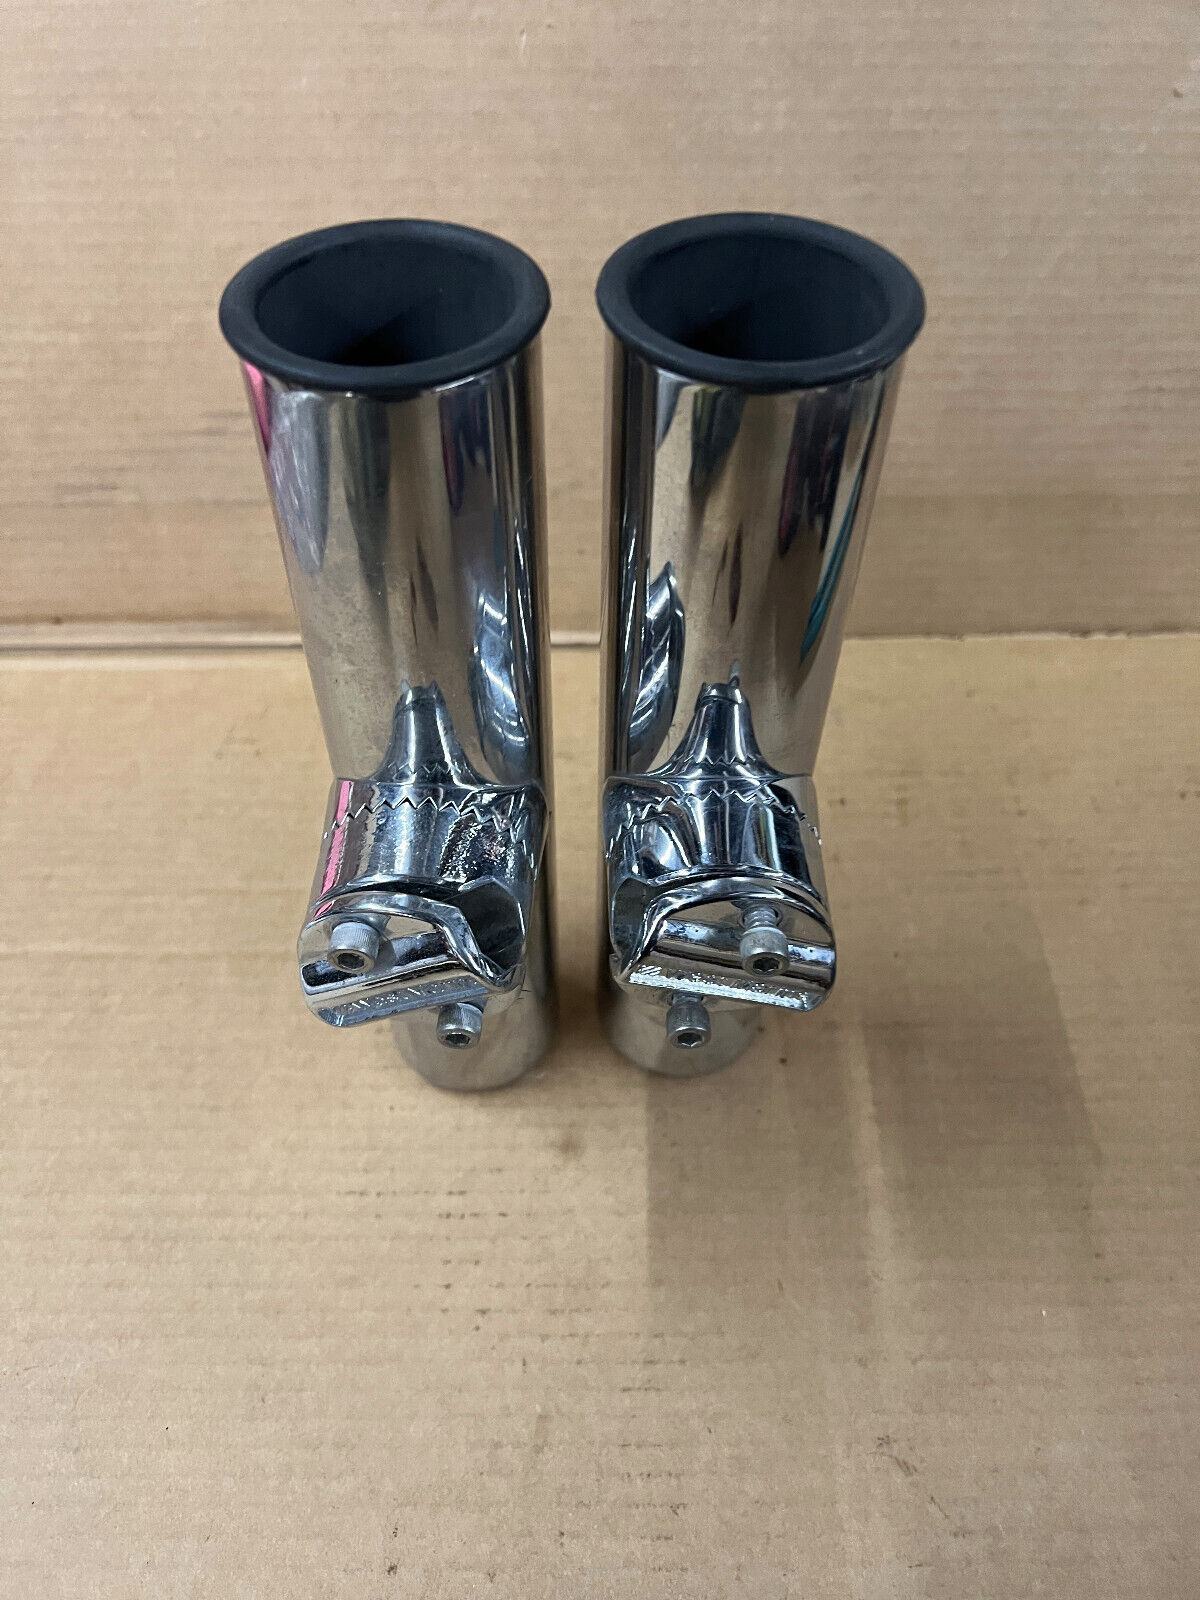 Lot of 2 Stainless Steel SS Rod Holder Bar / Rail Mount By WEST